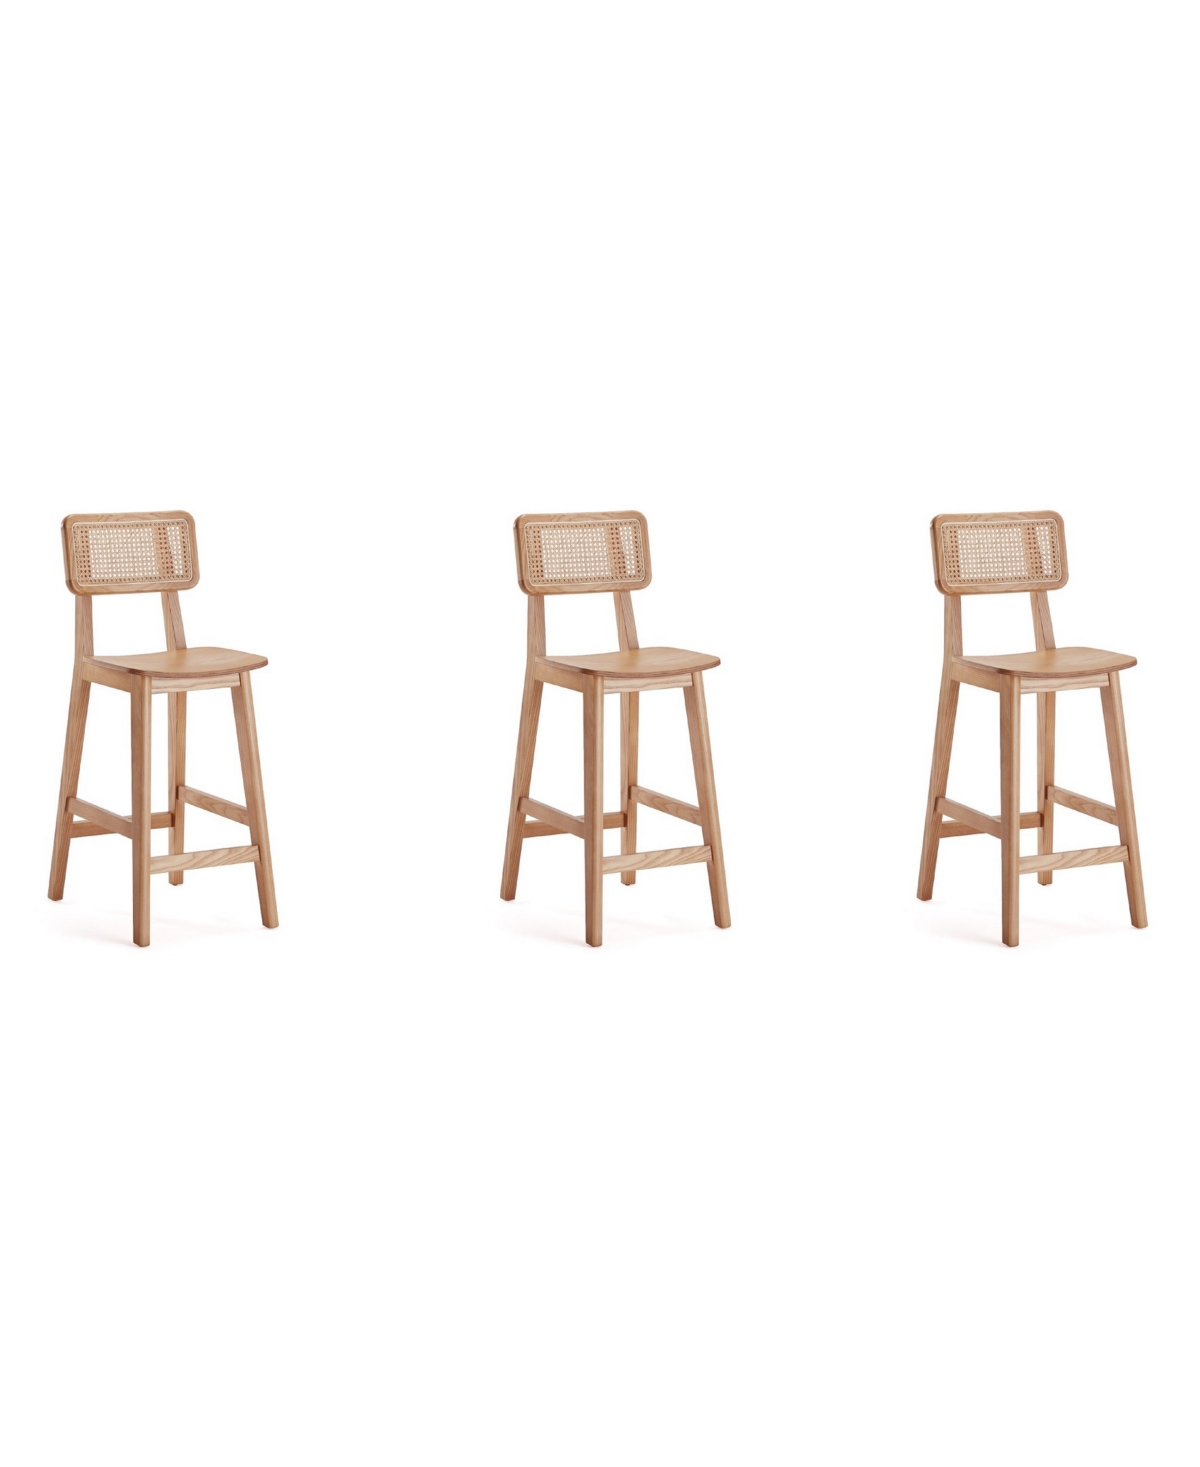 Manhattan Comfort Versailles 3-piece Ash Wood And Natural Cane Counter Height Bar Stool In Nature